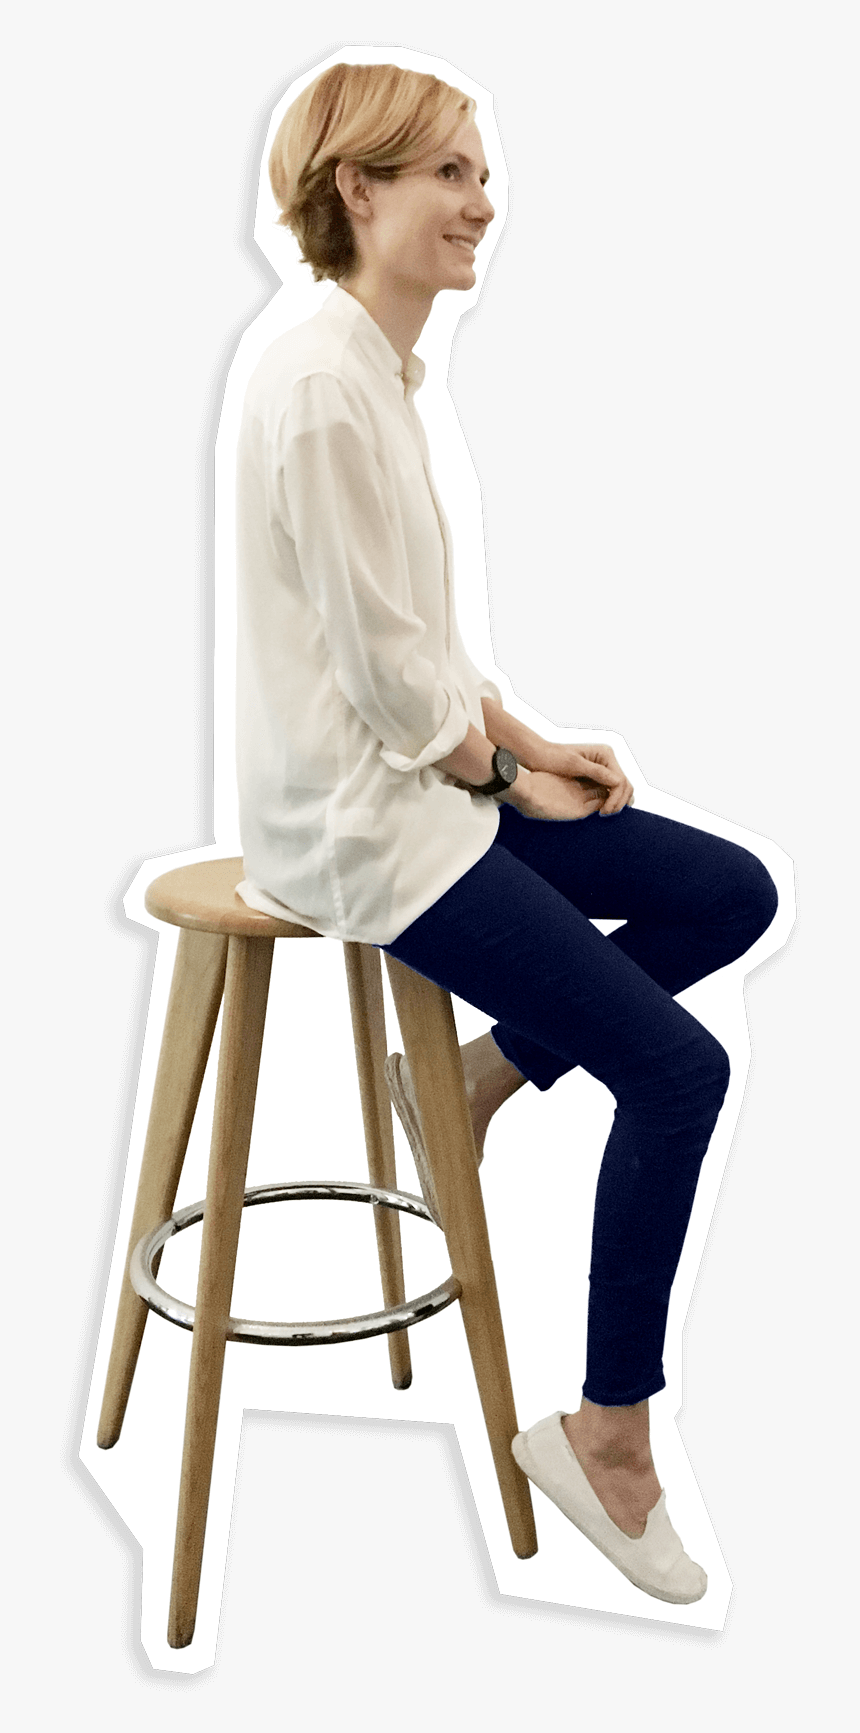 Sitting On Stool Png, Transparent Png, Free Download